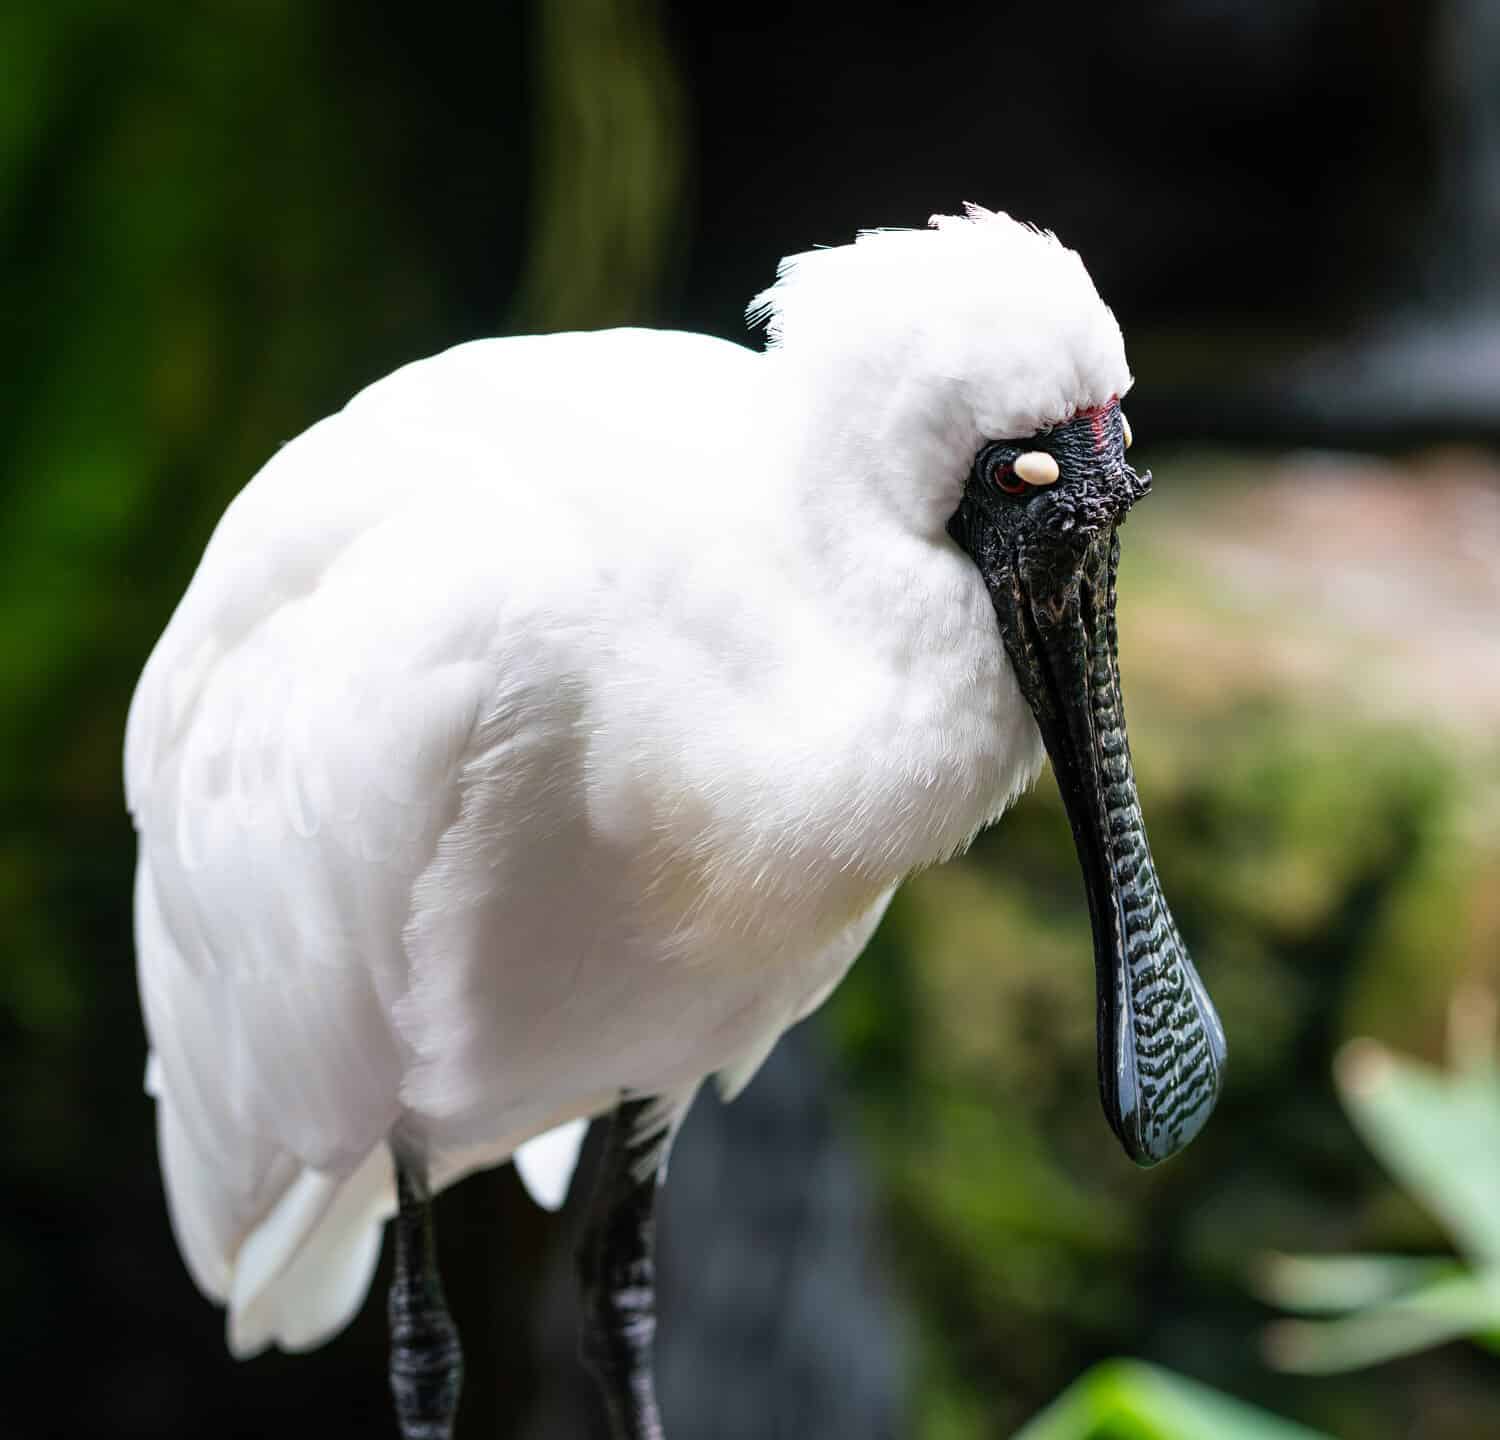 Close-up view of a Royal spoonbill or black-billed spoonbill Platalea regia in NSW Australia